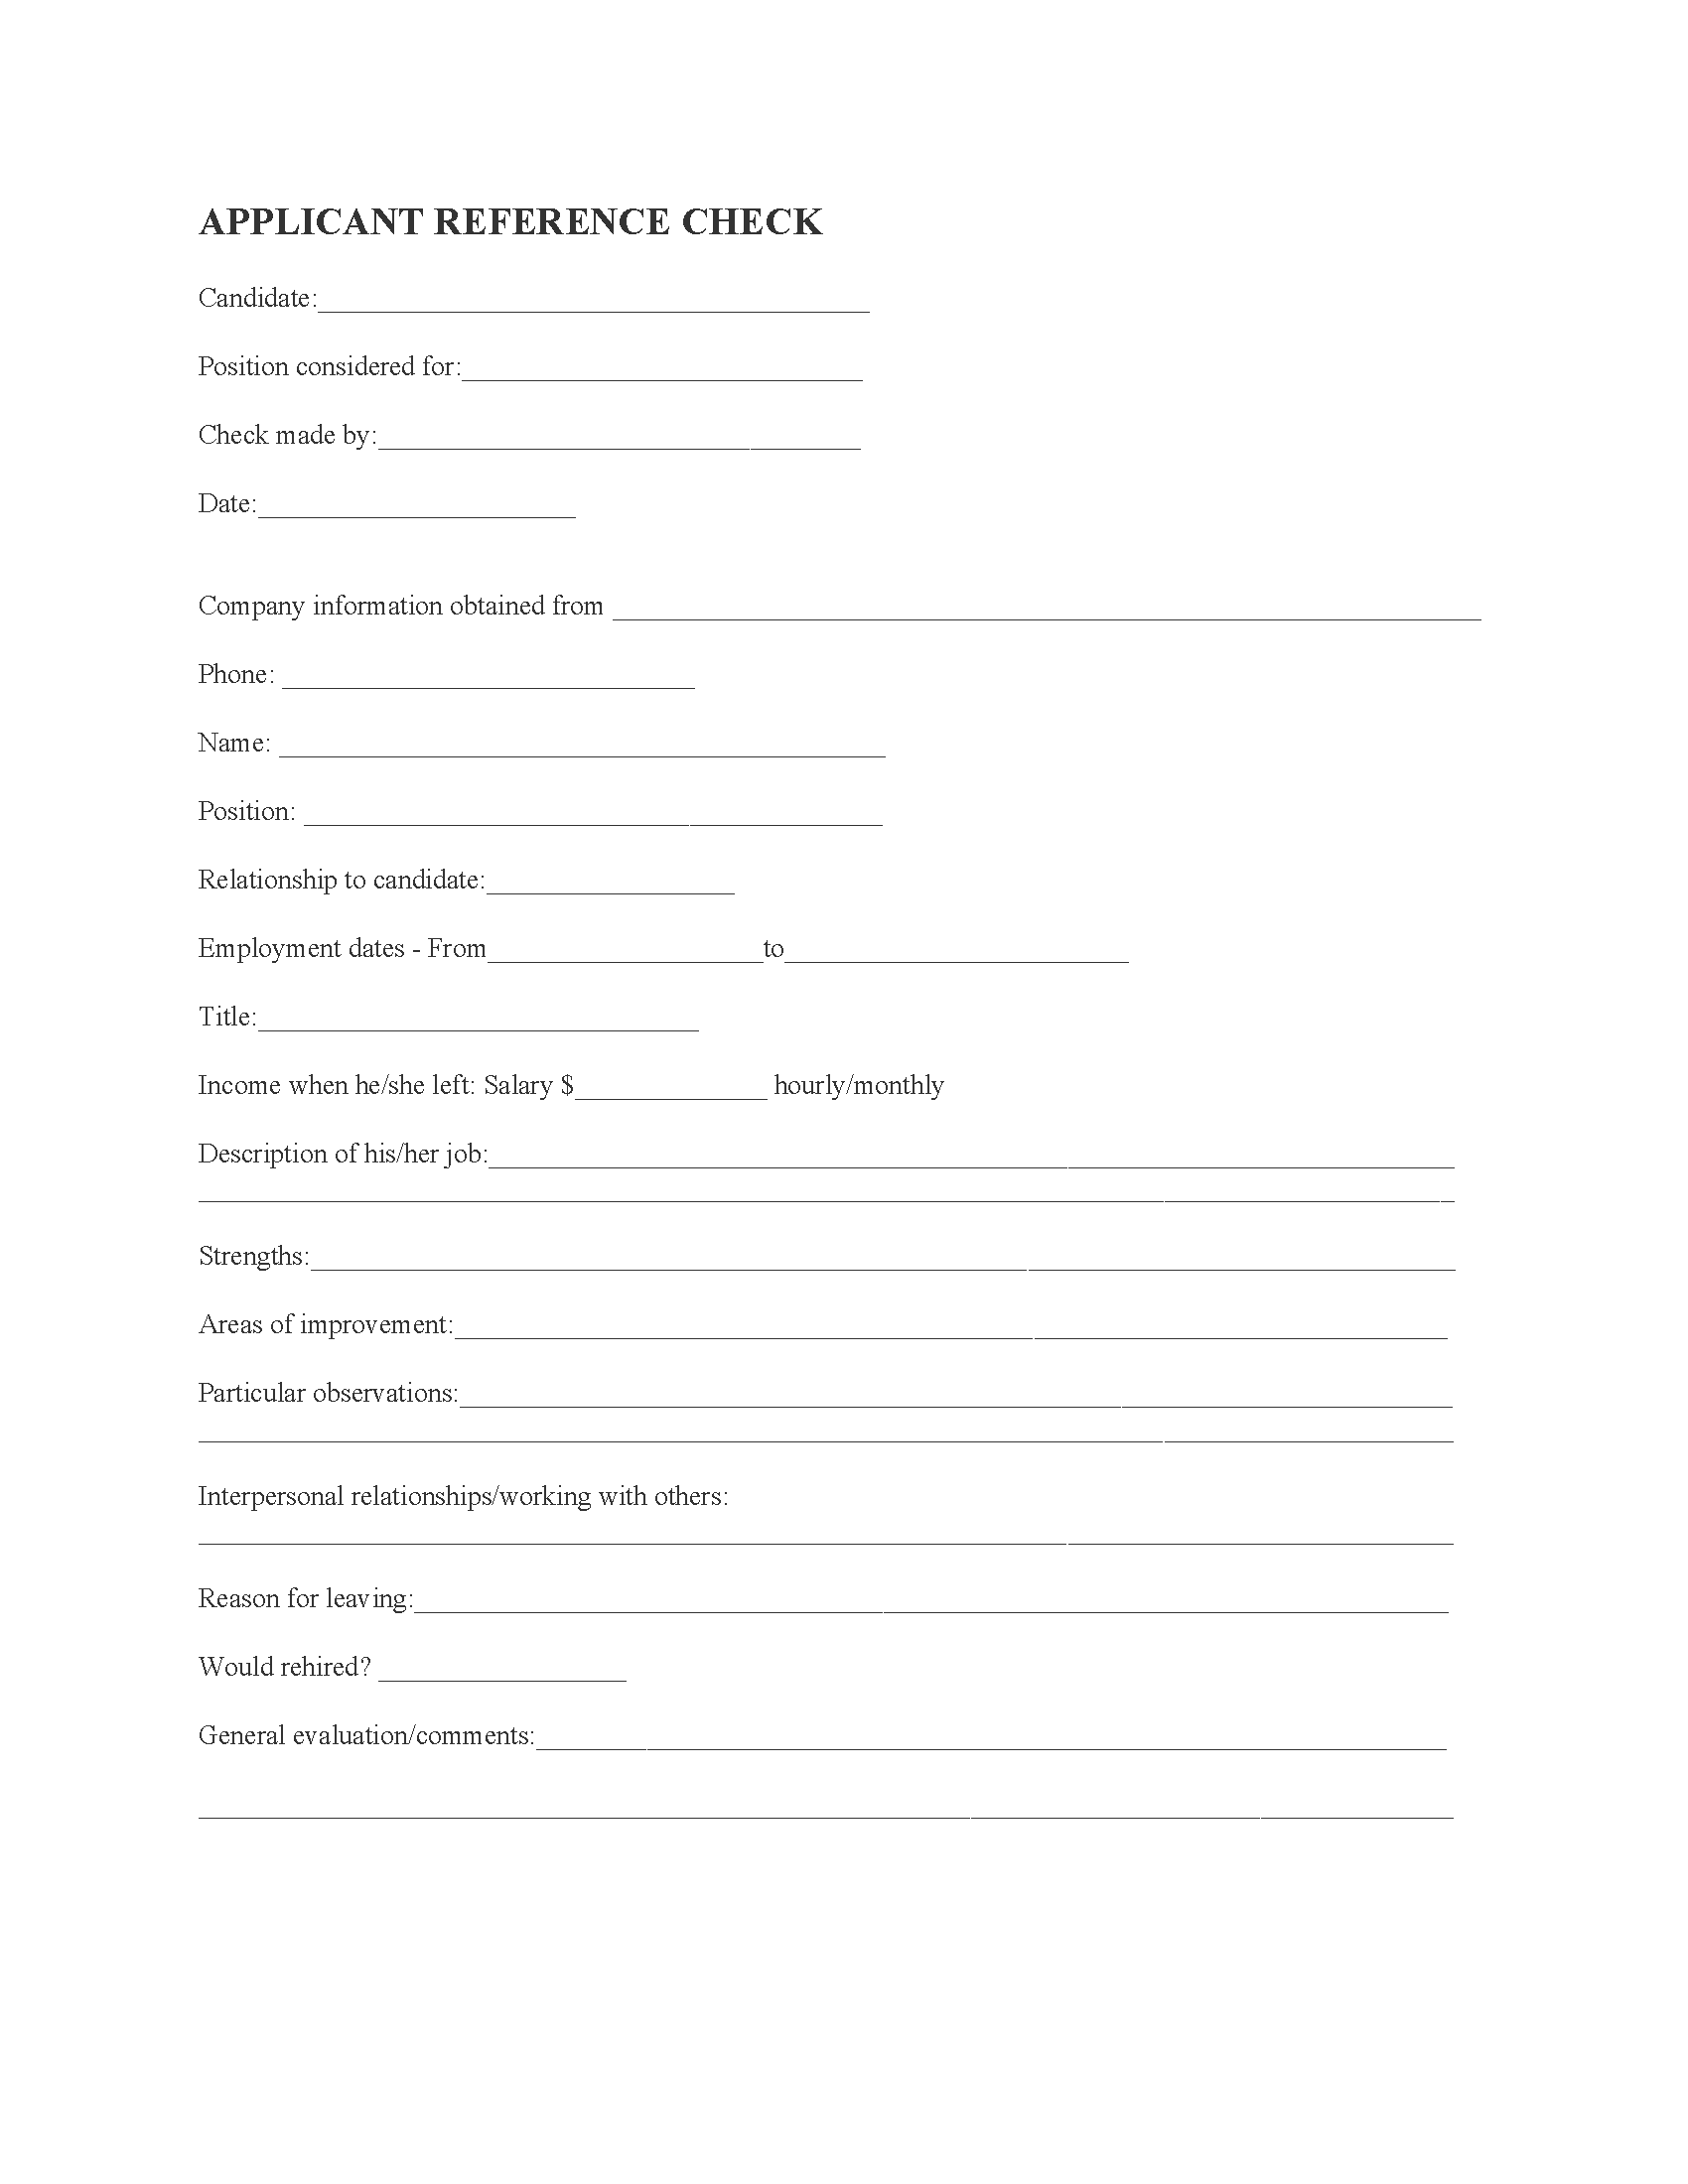 Business Forms Archives Free Printable Legal Forms 9314